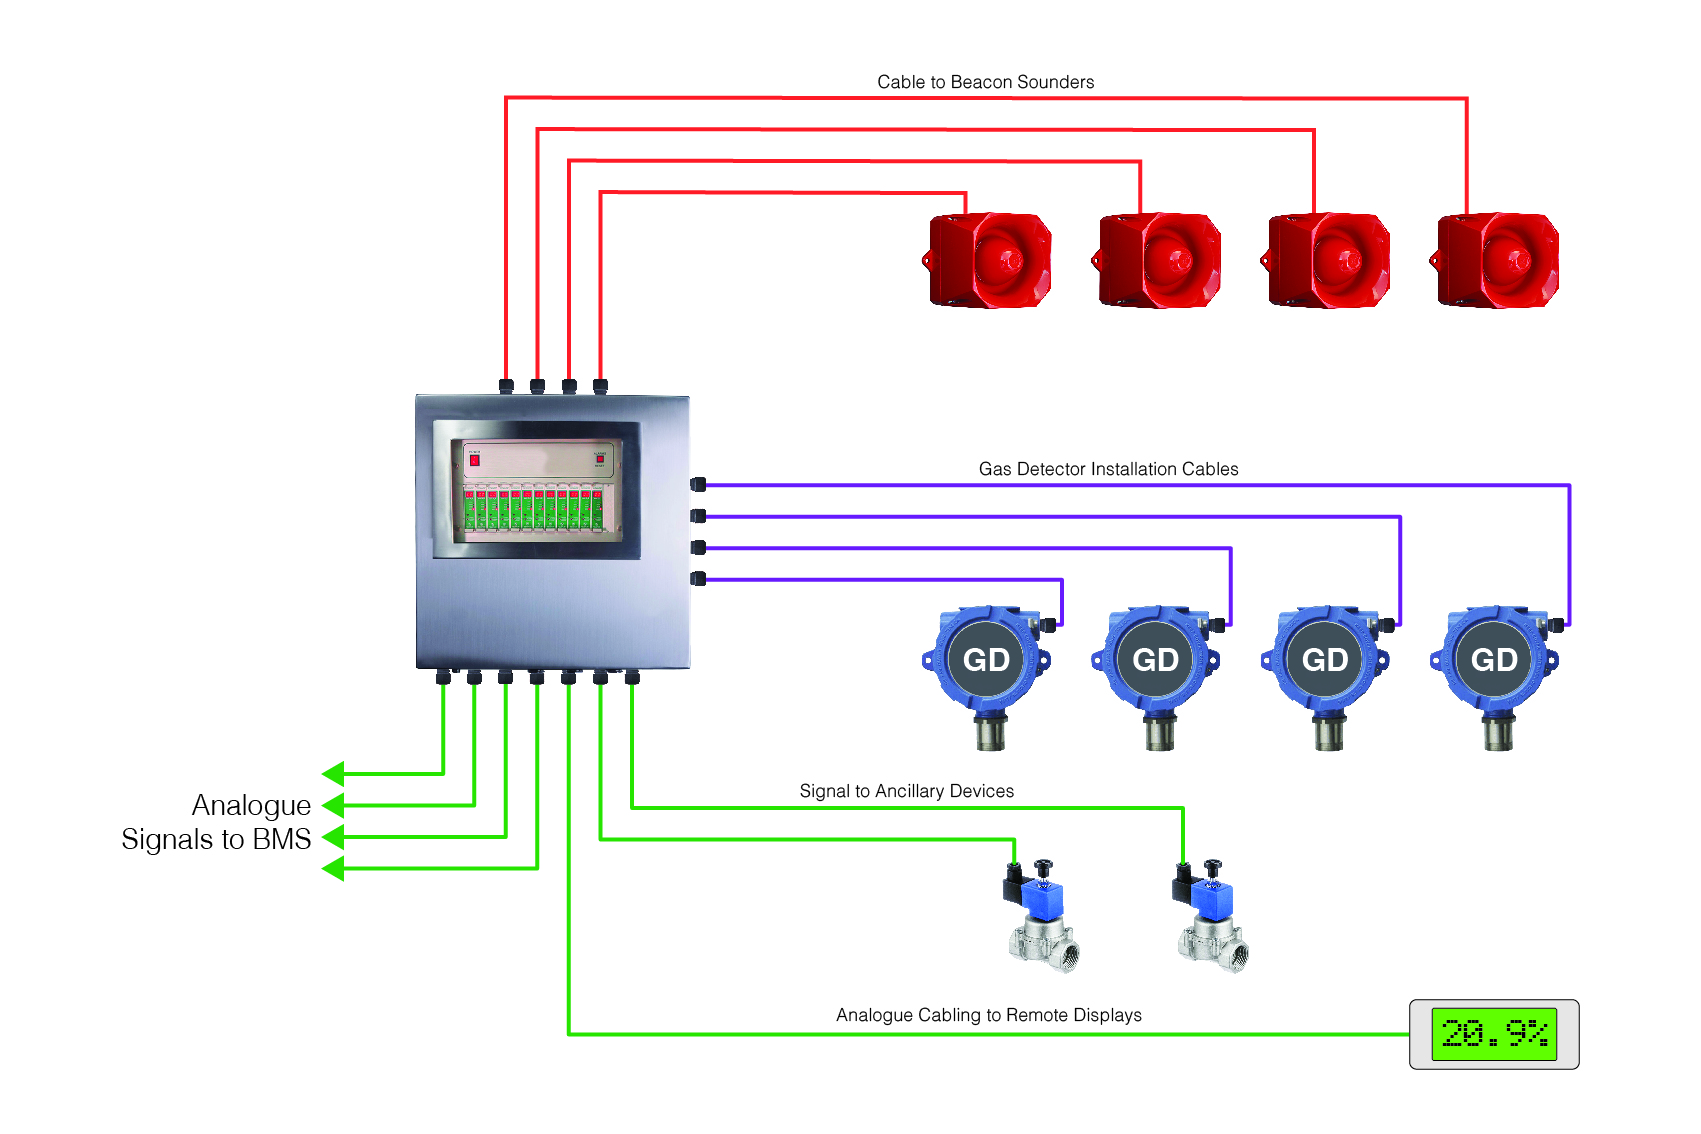 a typical analogue gas detection system isn't as effective as addressable gas detection systems